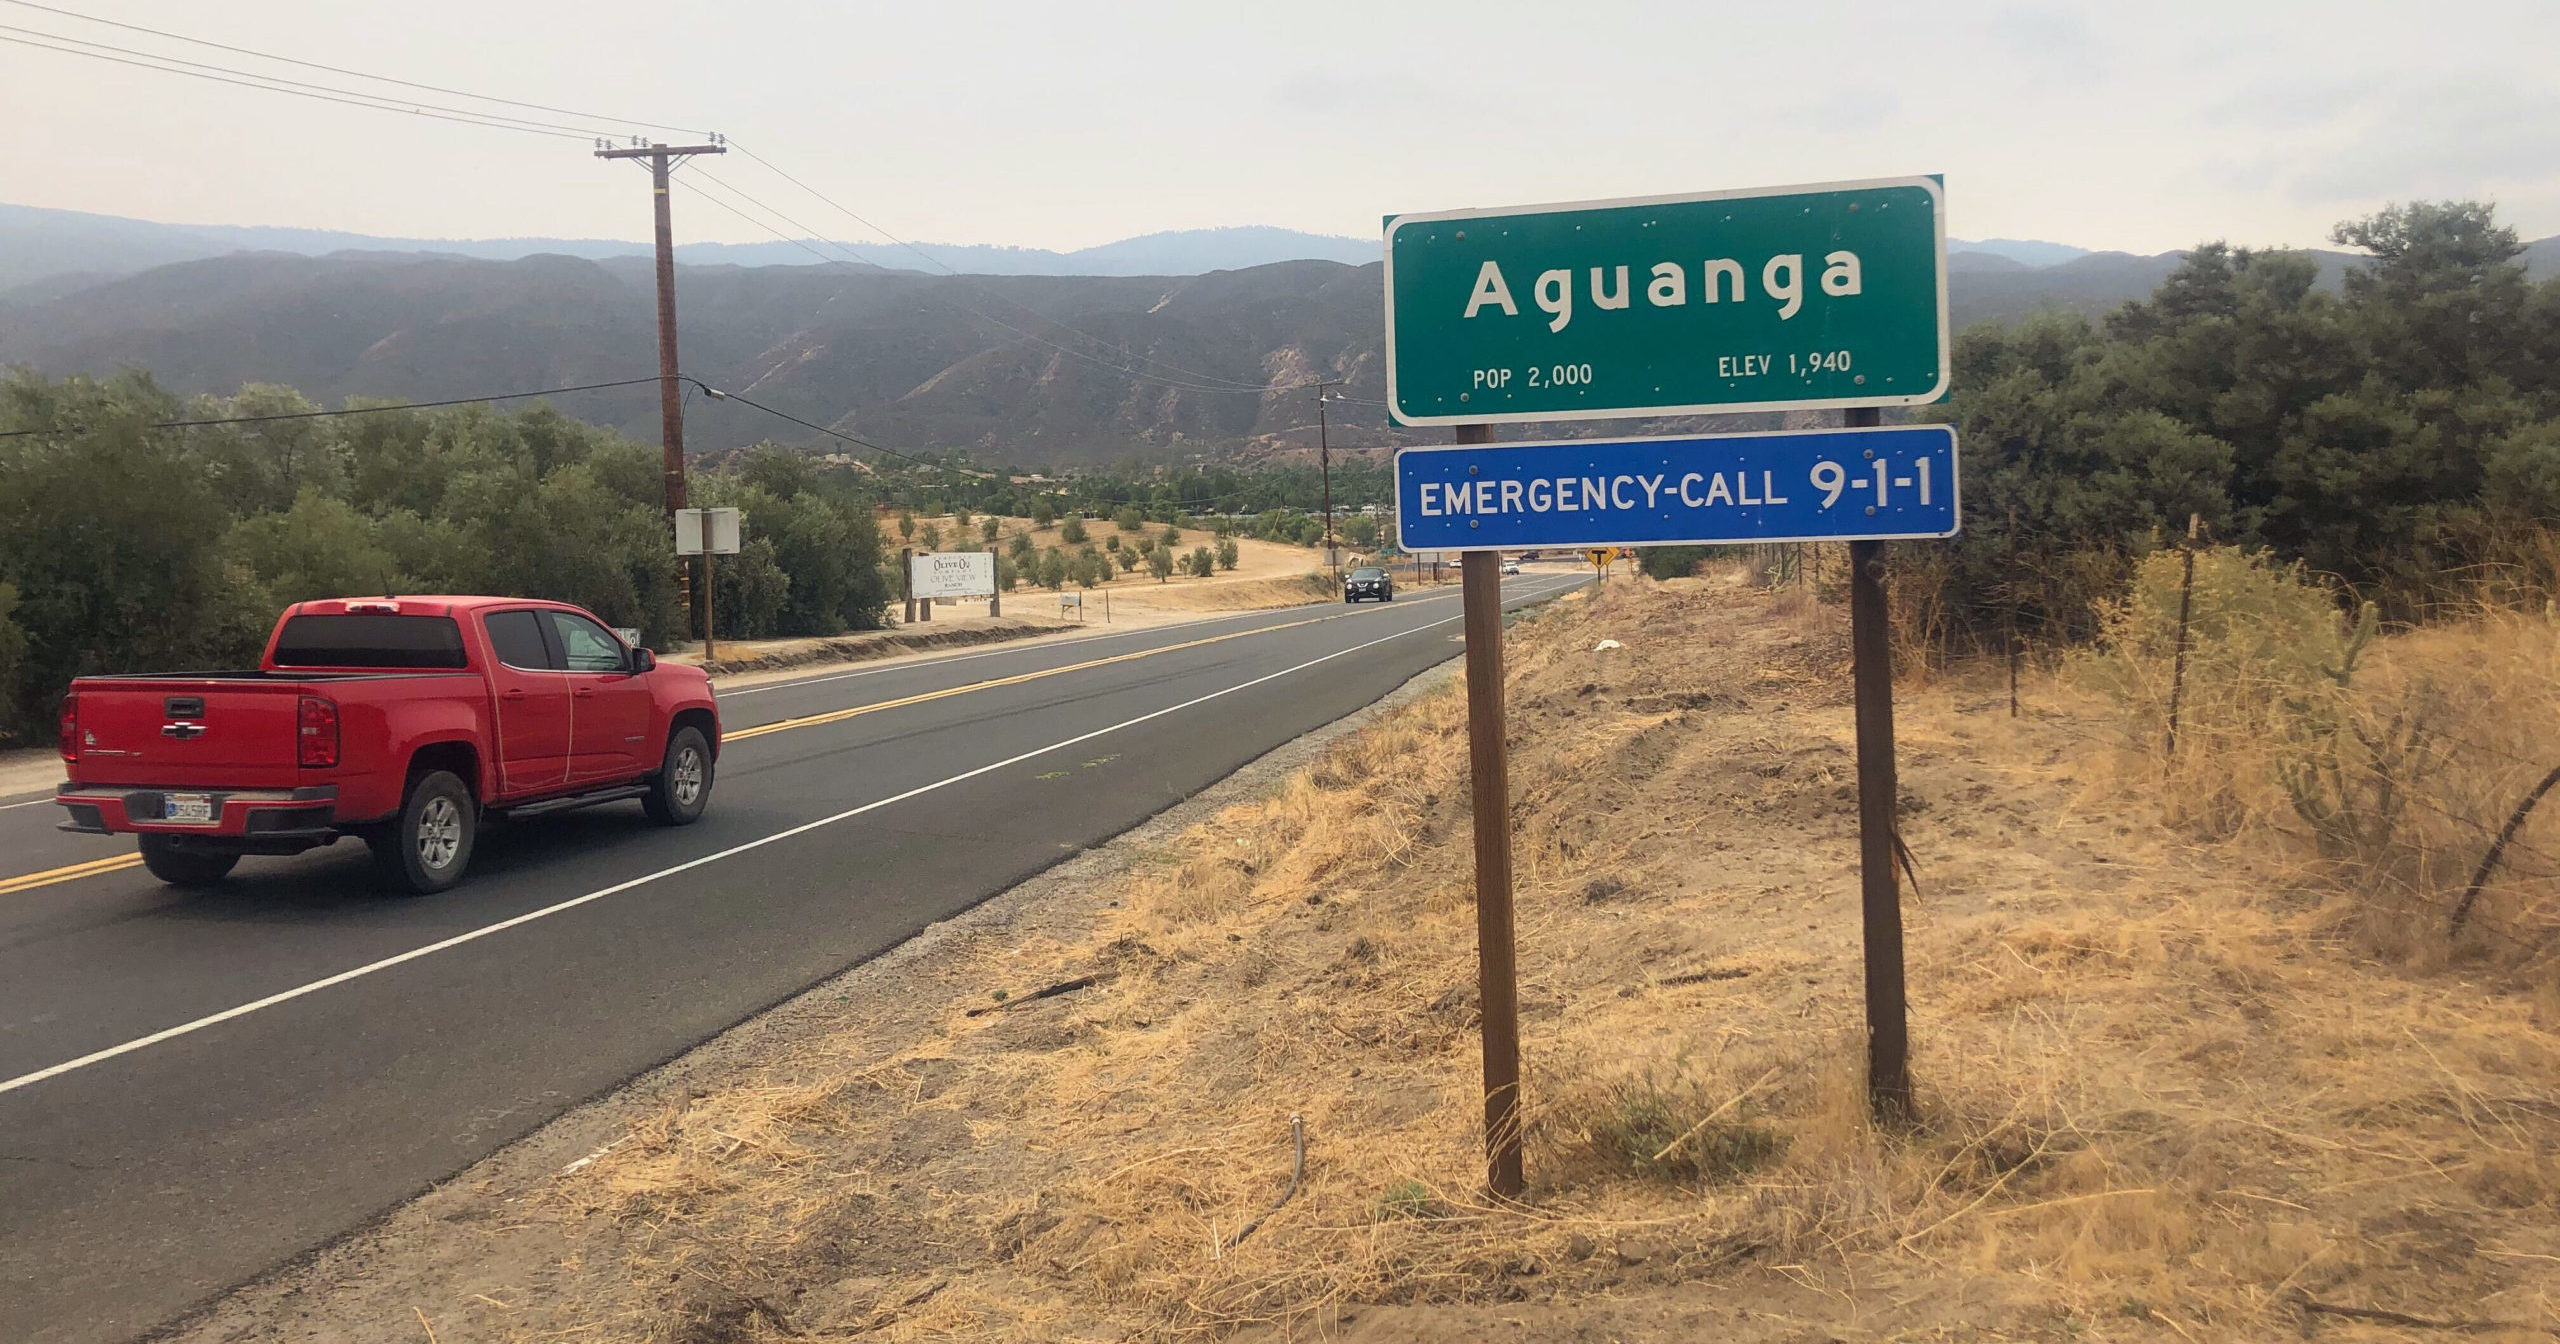 Traffic passes along State Route 371 entering the town of Aguanga, California, on Sep. 8, 2020.